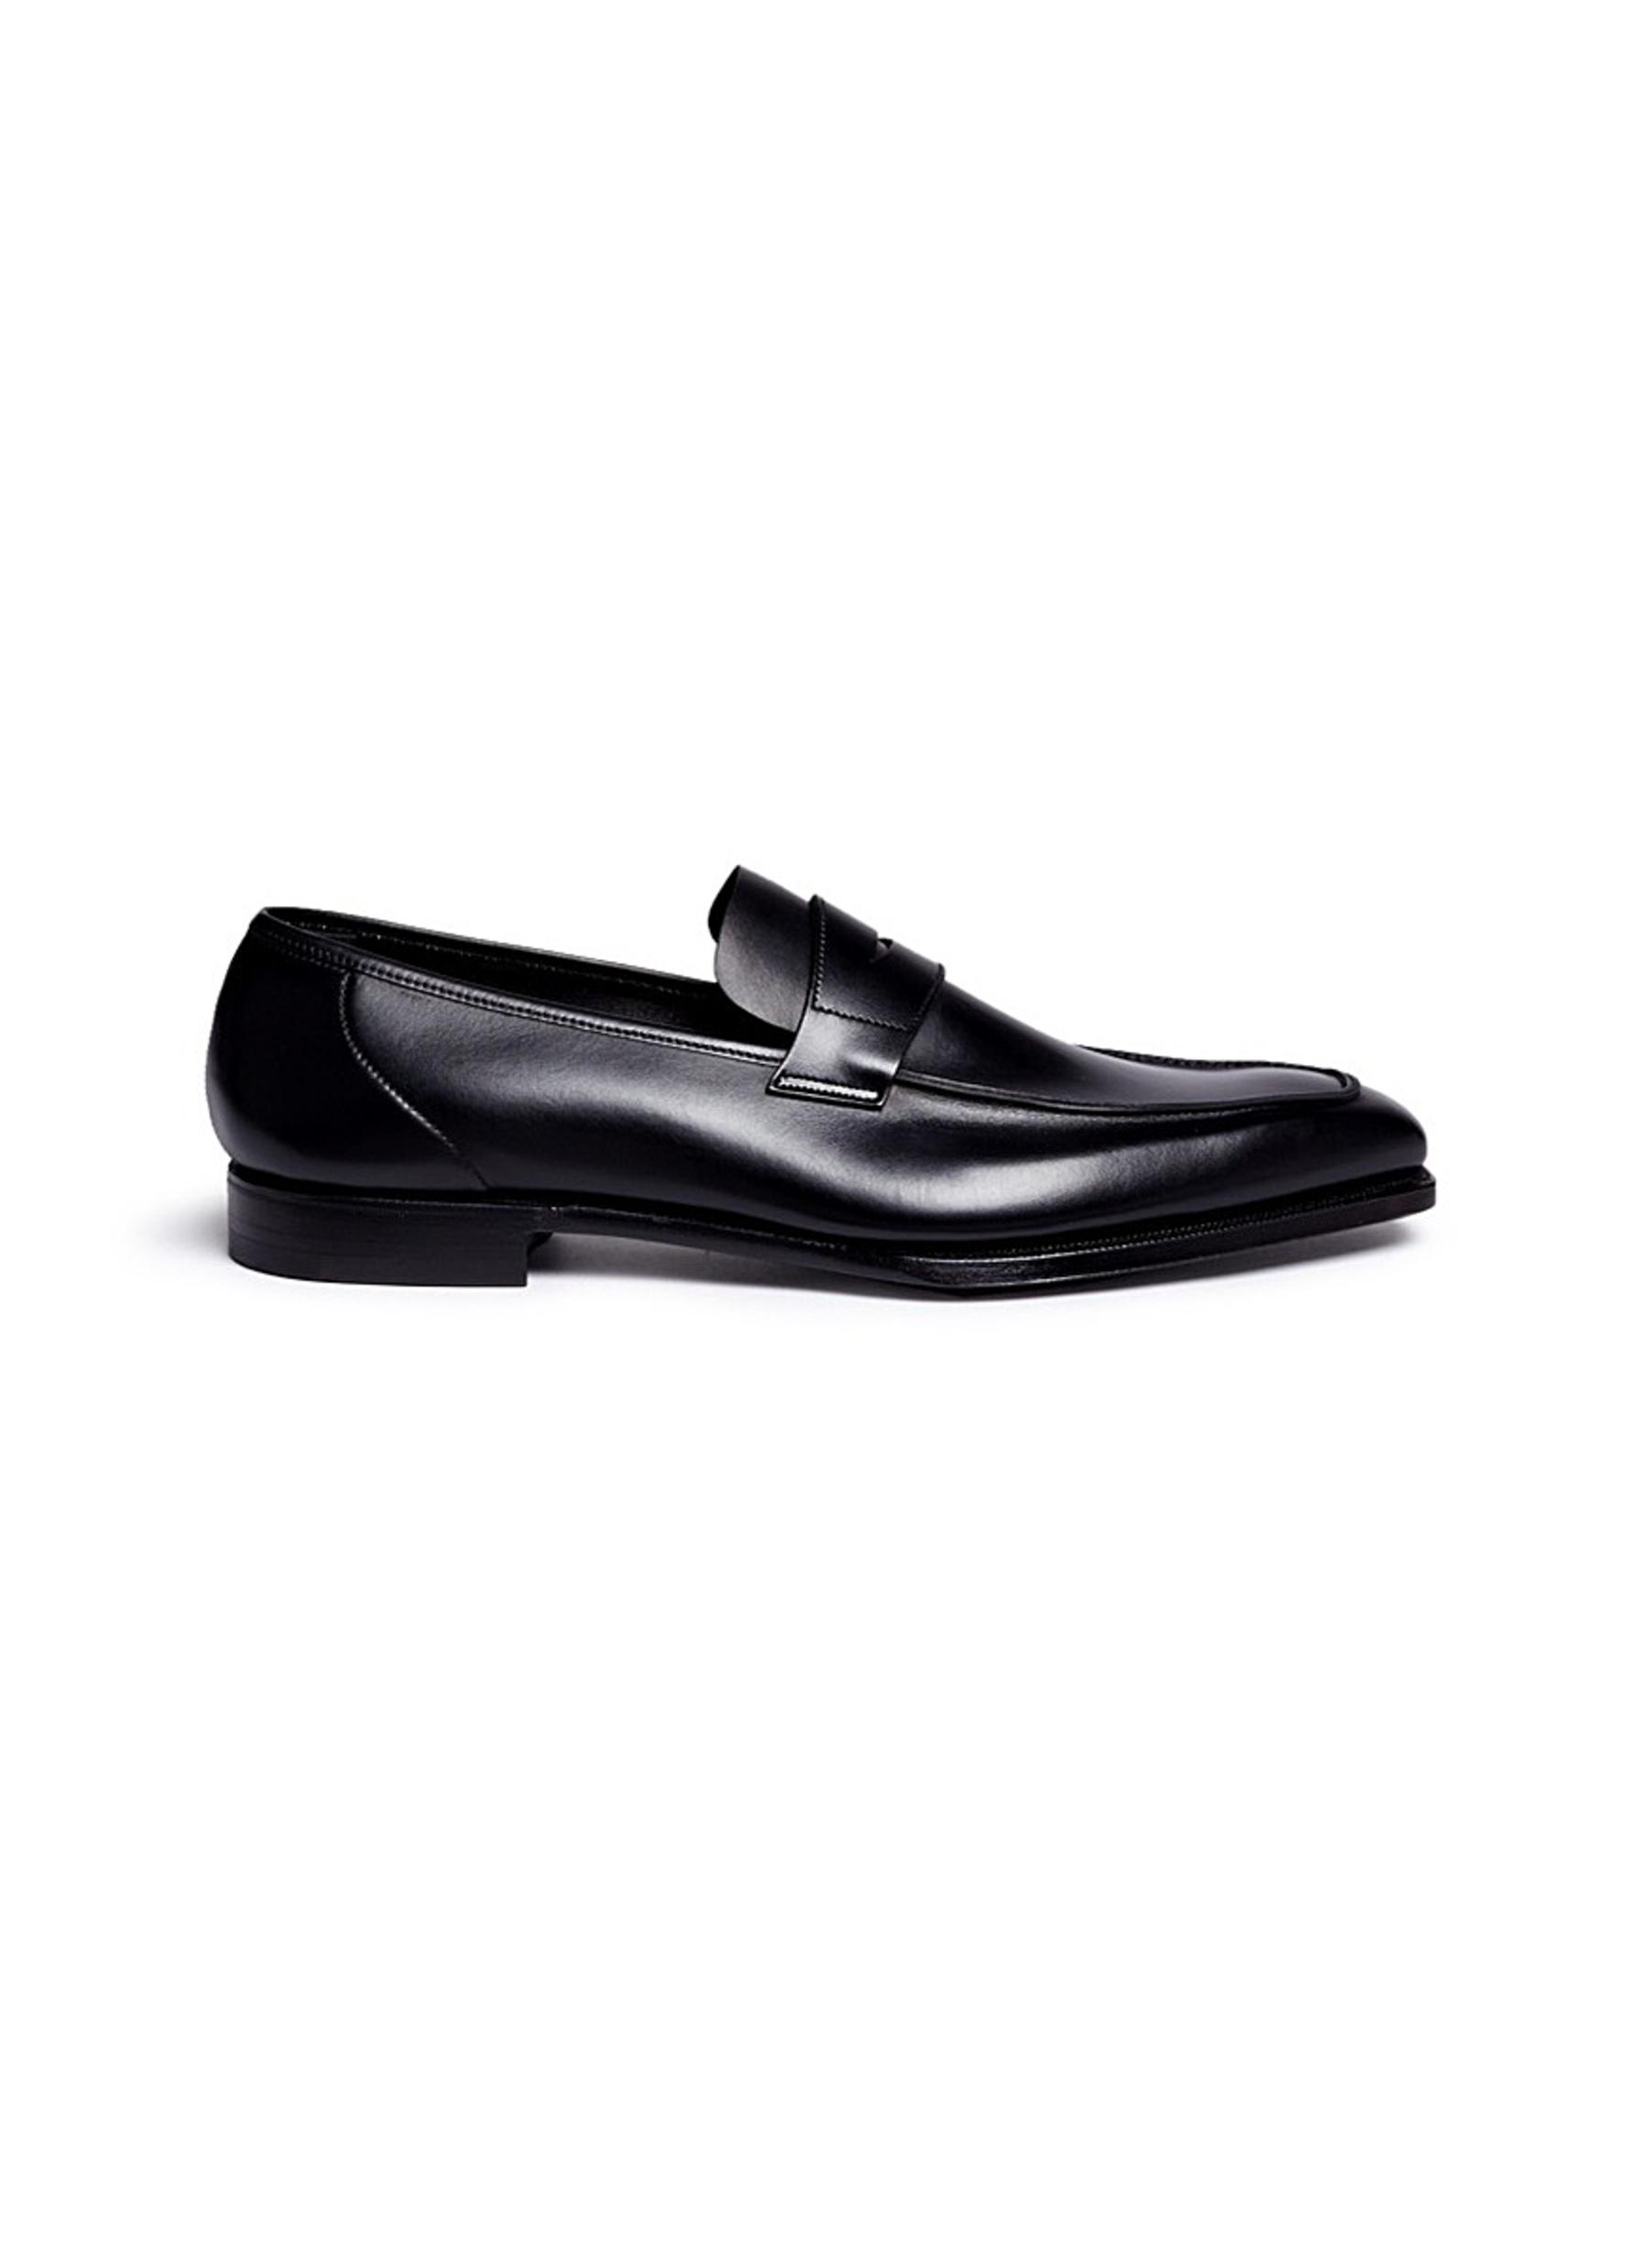 ’George’ leather penny loafers